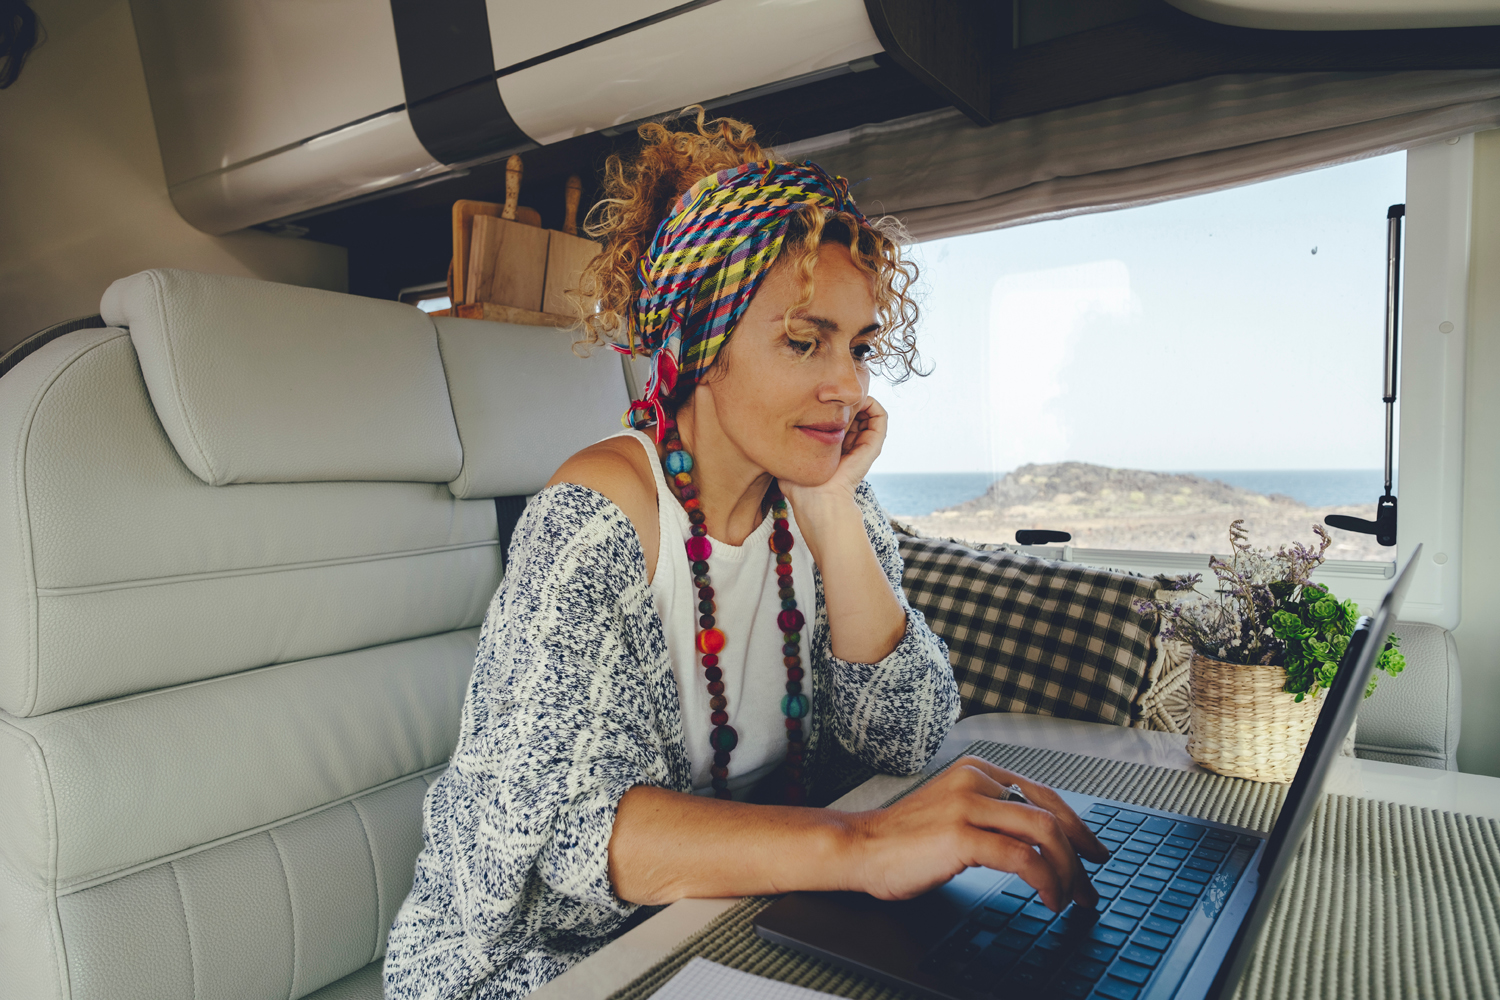 Attracive young adult woman using laptop computer inside camper